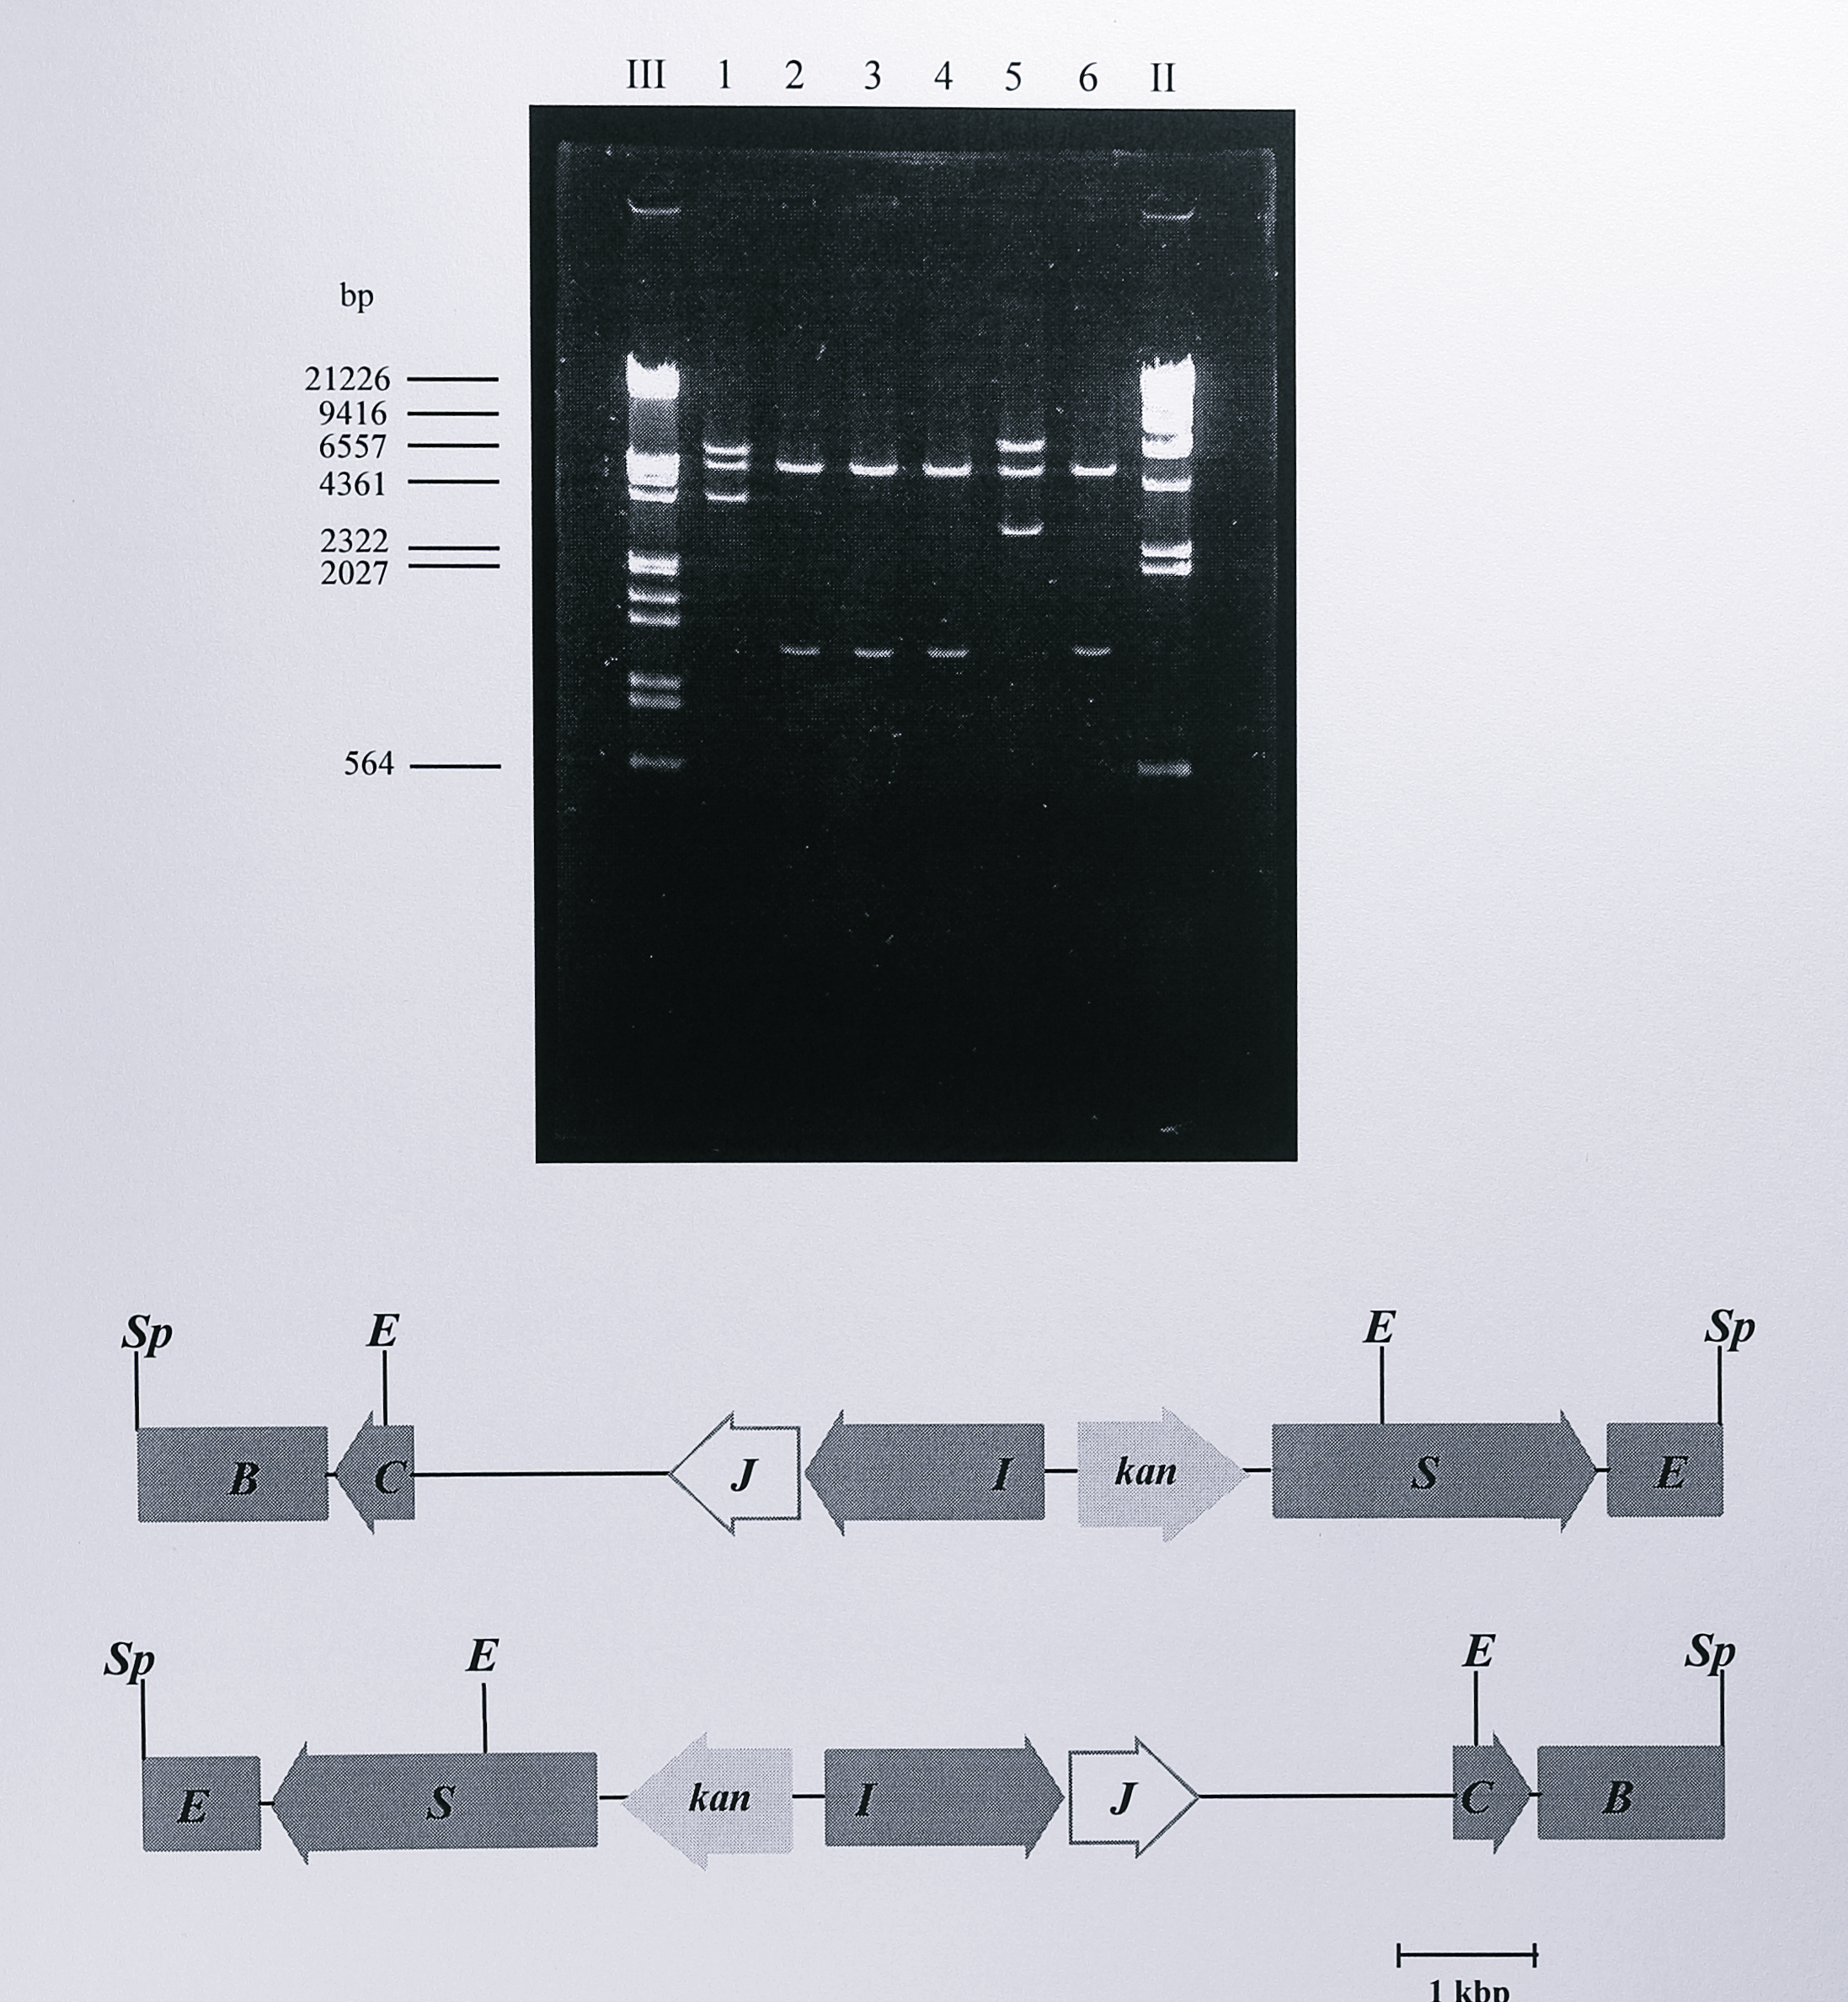 Restriction digest analysis of plasmid pGRPN3K. Following ligation and transformation, plasmid DNA was isolated from the transformed cells and digested using _EcoRI_ (lanes 1-6), the DNA fragments were separated by electrophoresis on a 0.8% agarose gel. The possible orientations of the _SphI_ insert from pTNIR3K are shown below the gel. Two _EcoRI_ sites in the insert and a third site in the vector produce three fragments of approximate sizes 6.3, 5.6 and 3.6 kbp (first orientation) or 7.0, 5.6 and 2.9 Kbp (second orientation). These are seen in lanes 1 and 5 respectively. Enzymes: E, _EcoRI_, Sp, _SphI_. Lanes labelled III and II contain DNA size standards, the sizes of some of which are indicated to the left of the gel.